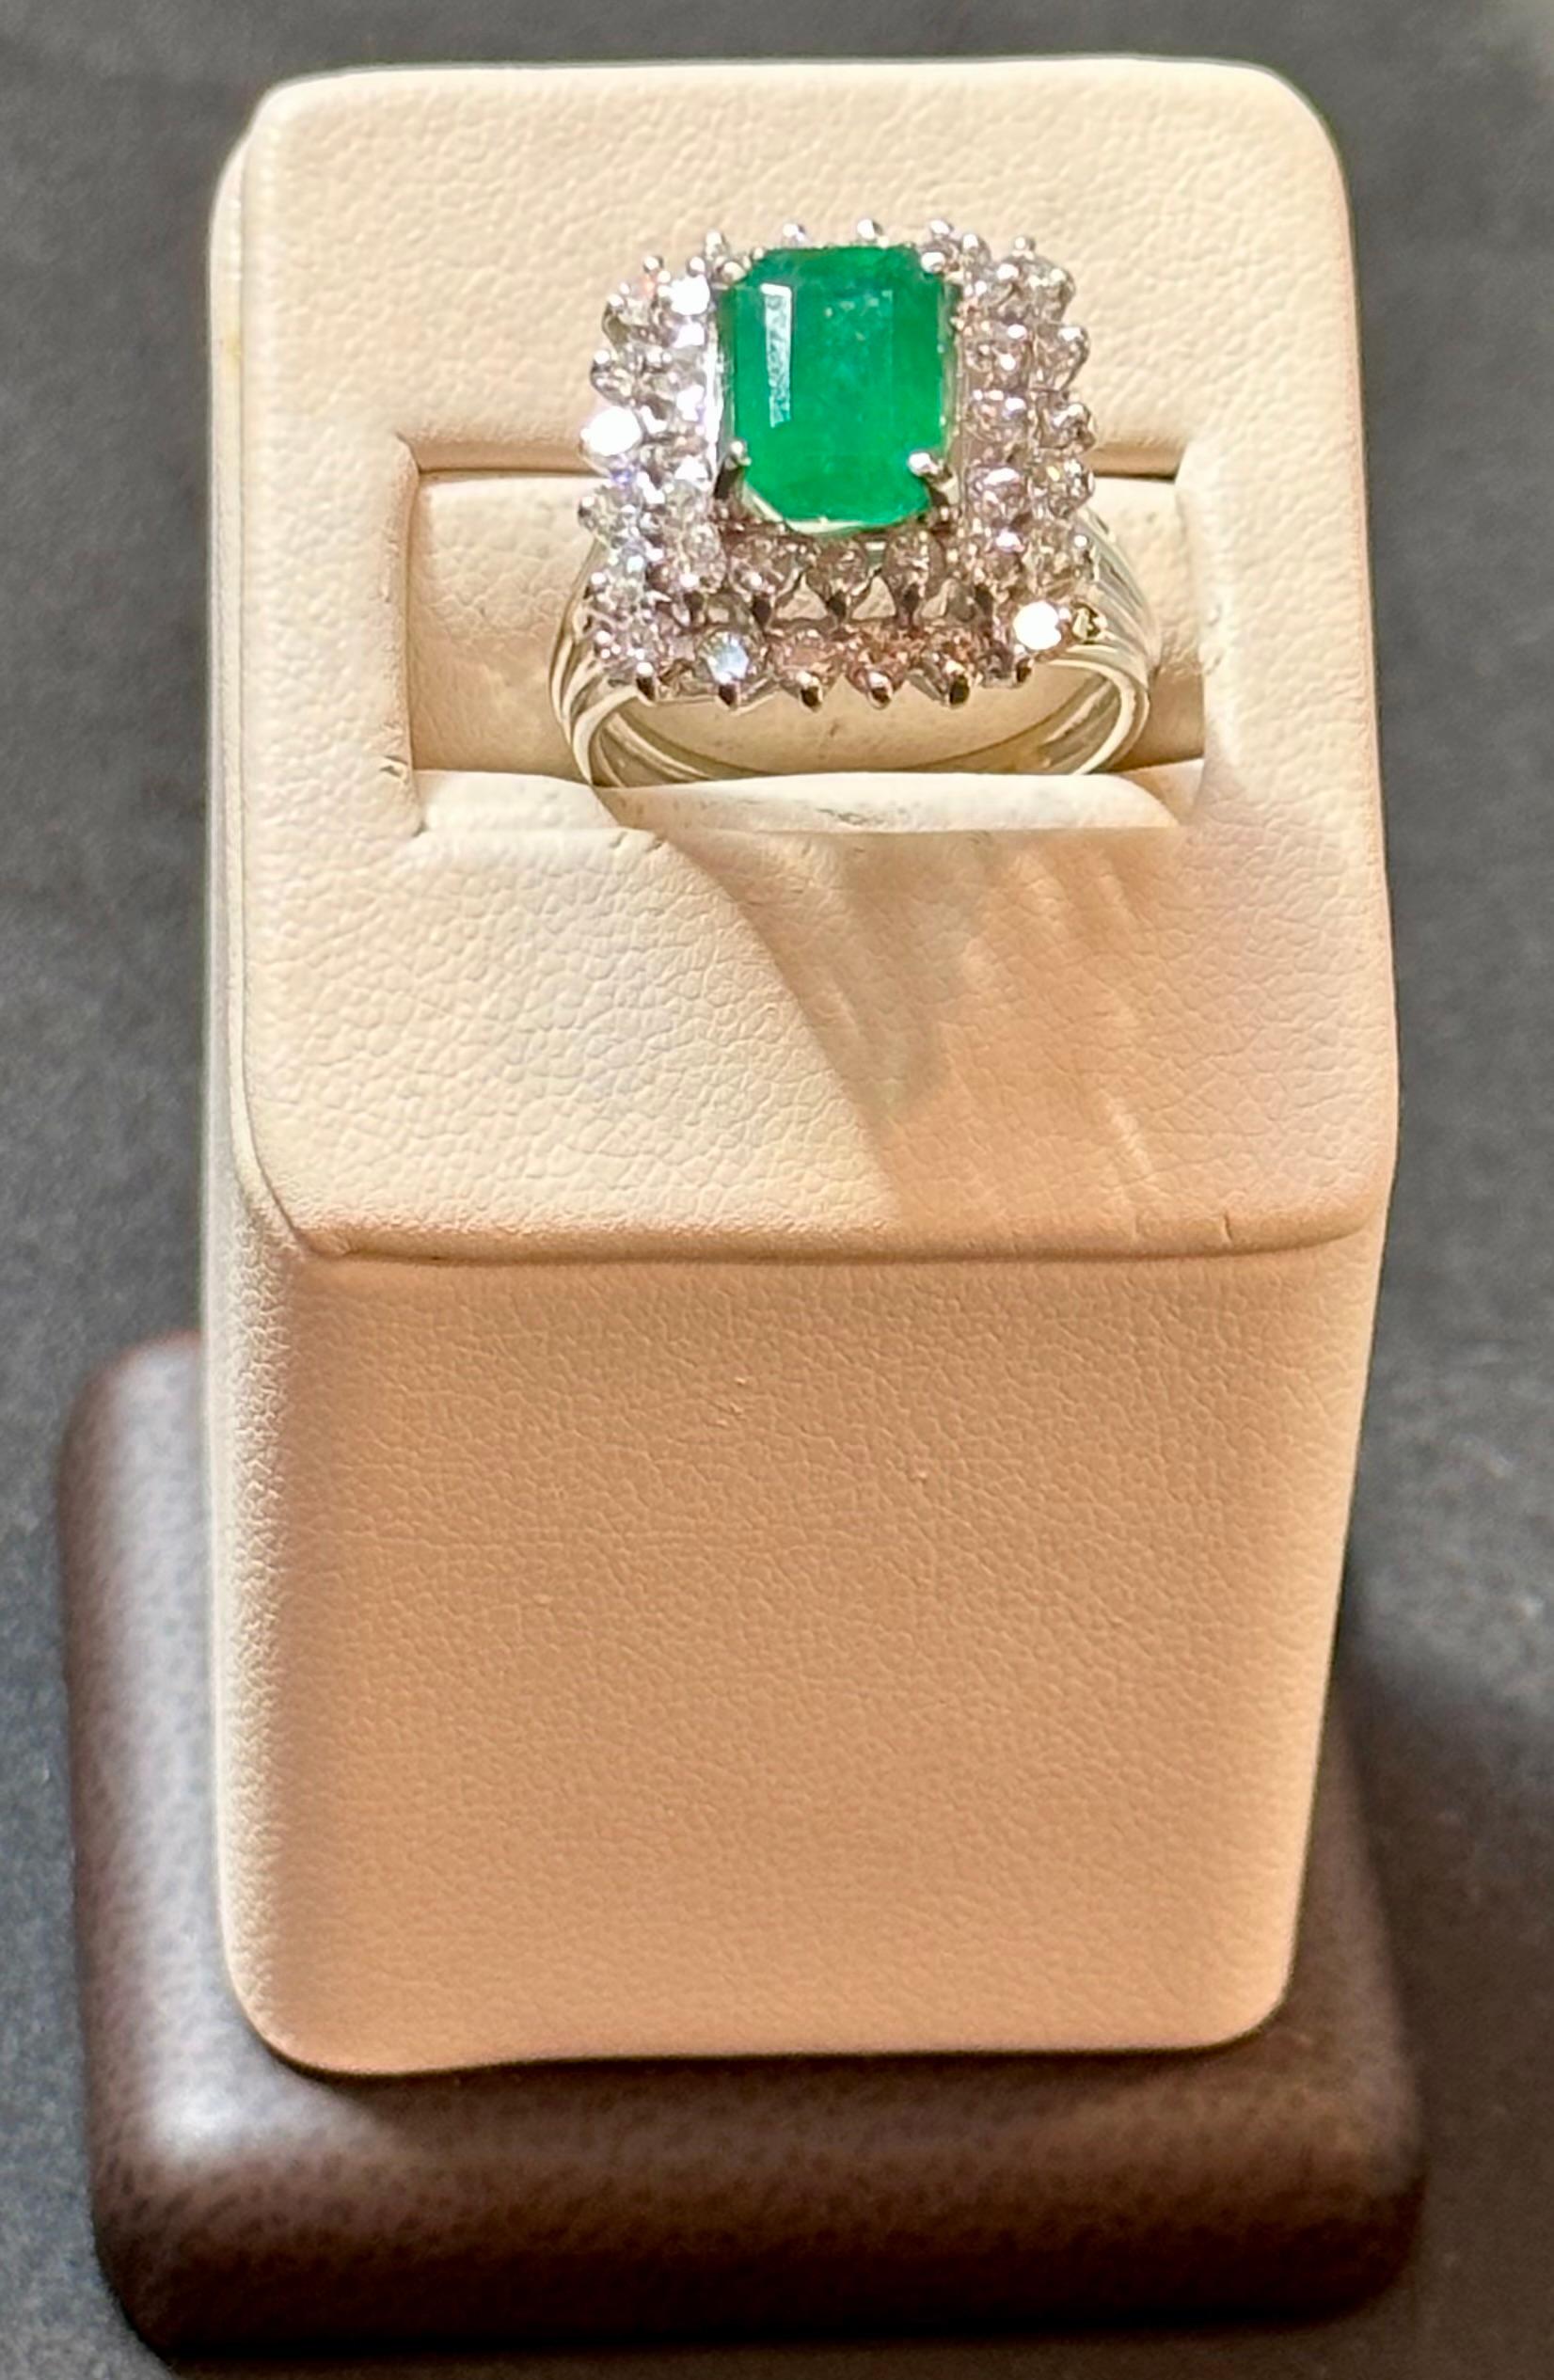 3 Carat Emerald Cut Emerald & 2 Carat Diamond Ring 14 Karat White Gold In Excellent Condition For Sale In New York, NY